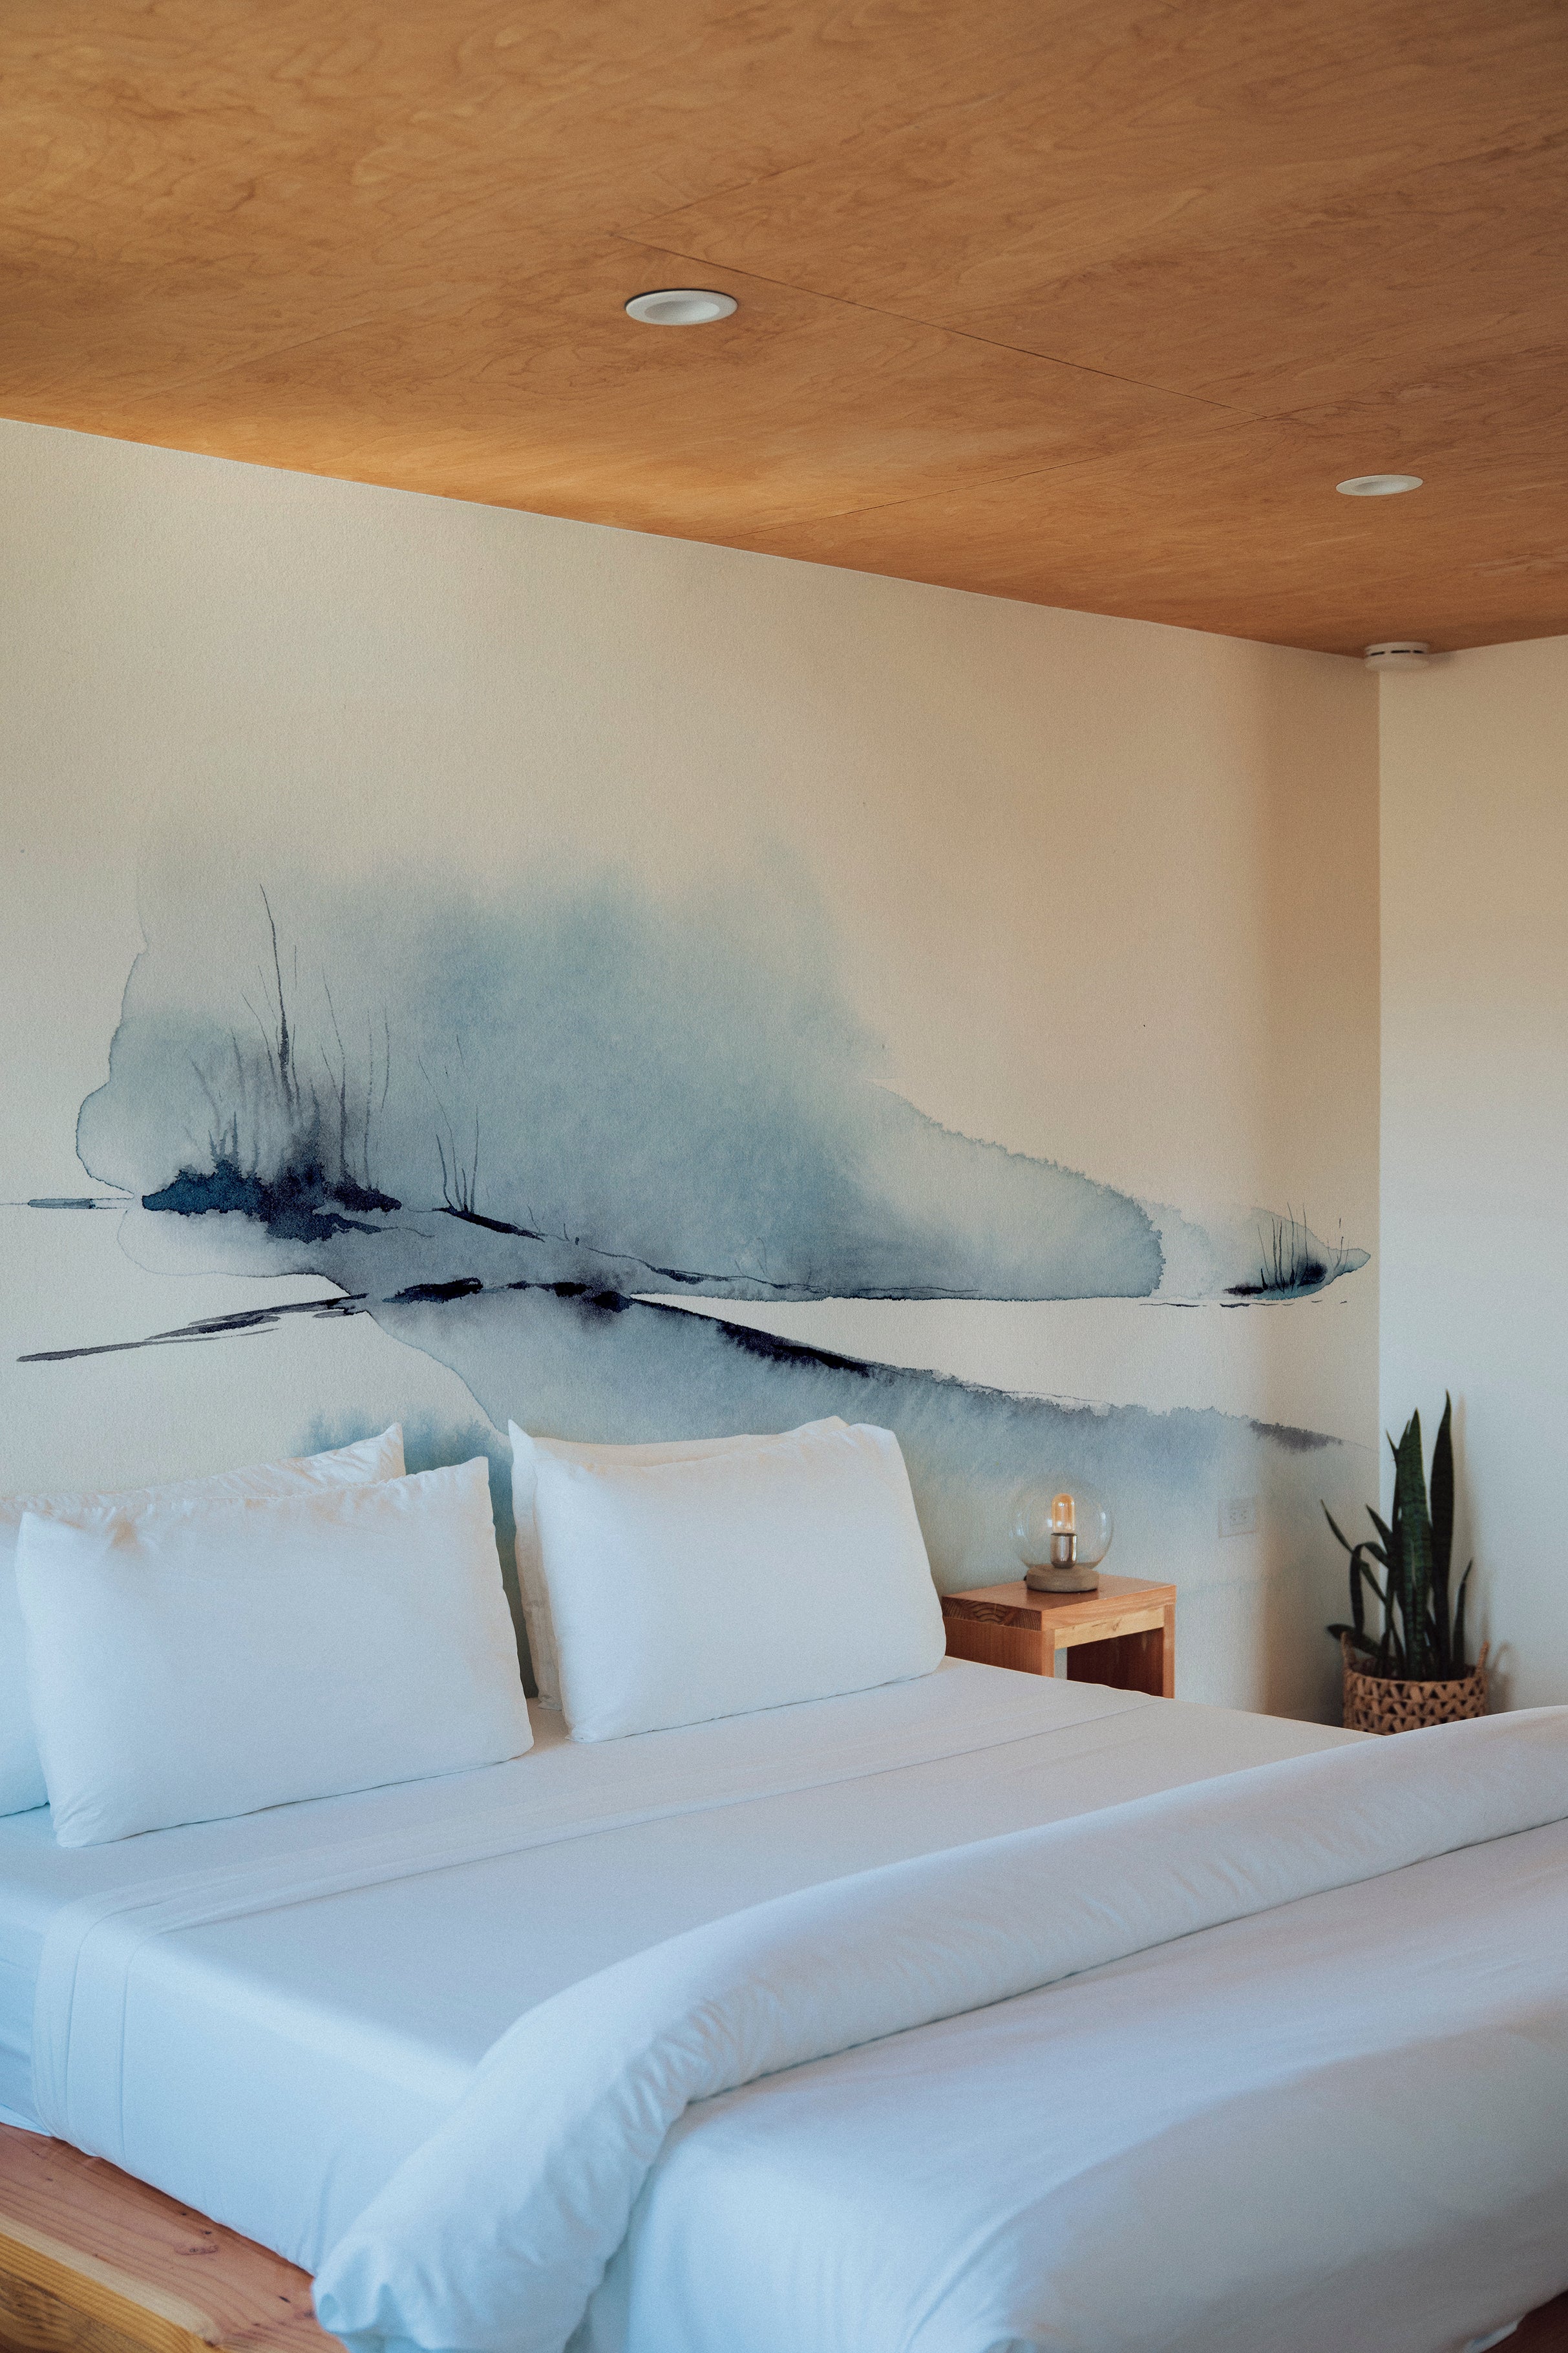 A serene bedroom setup with the "Atmospheric Sky" wall mural painting an ethereal watercolor landscape behind the bed. The mural's soothing blues and detailed brush strokes create a peaceful ambiance, complemented by simple white bedding and minimalistic decor.